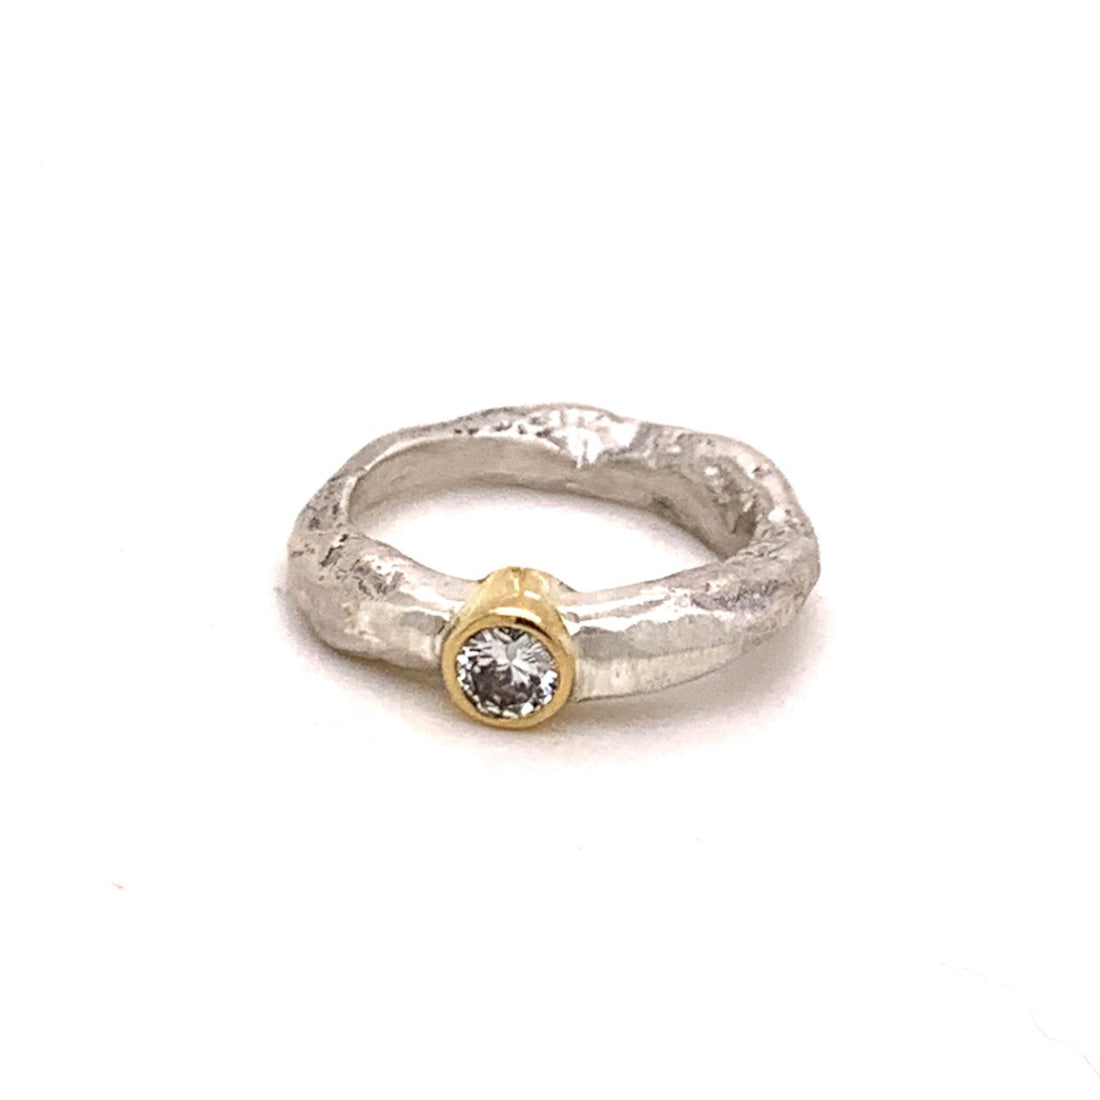 The Devotion Ring was designed for your life's journey in a beautiful and meaningful way. Made to celebrate the soul connection you have with yourself and with others. Each Devotion Ring is meticulously crafted with wabi-sabi intention, using only the finest precious metals and diamonds.